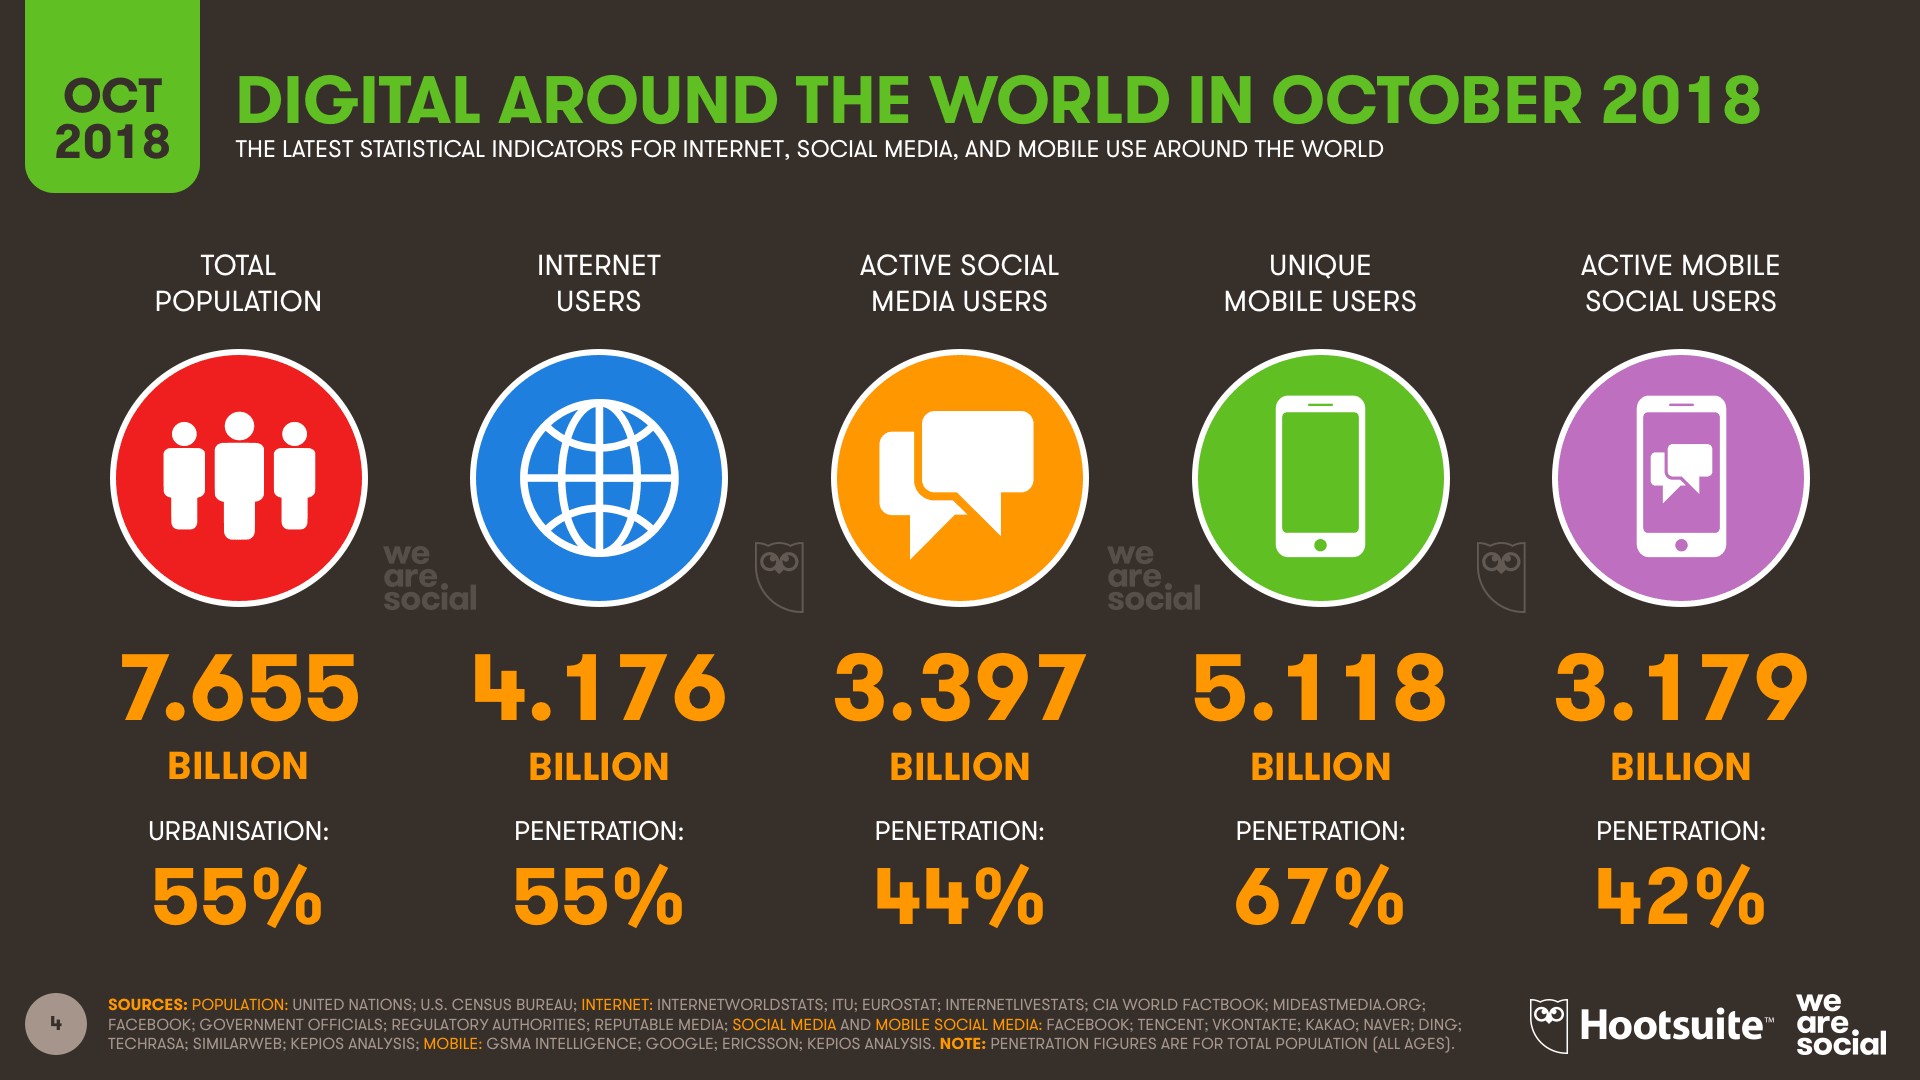 There are almost 4.2 billion internet users around the world in October 2018, up 7 percent since this time last year. Around 3.4 billion people around the world used social media in September 2018, up 10 percent versus September 2017. More than 5.1 billion people now use a mobile phone, with most using a smartphone.